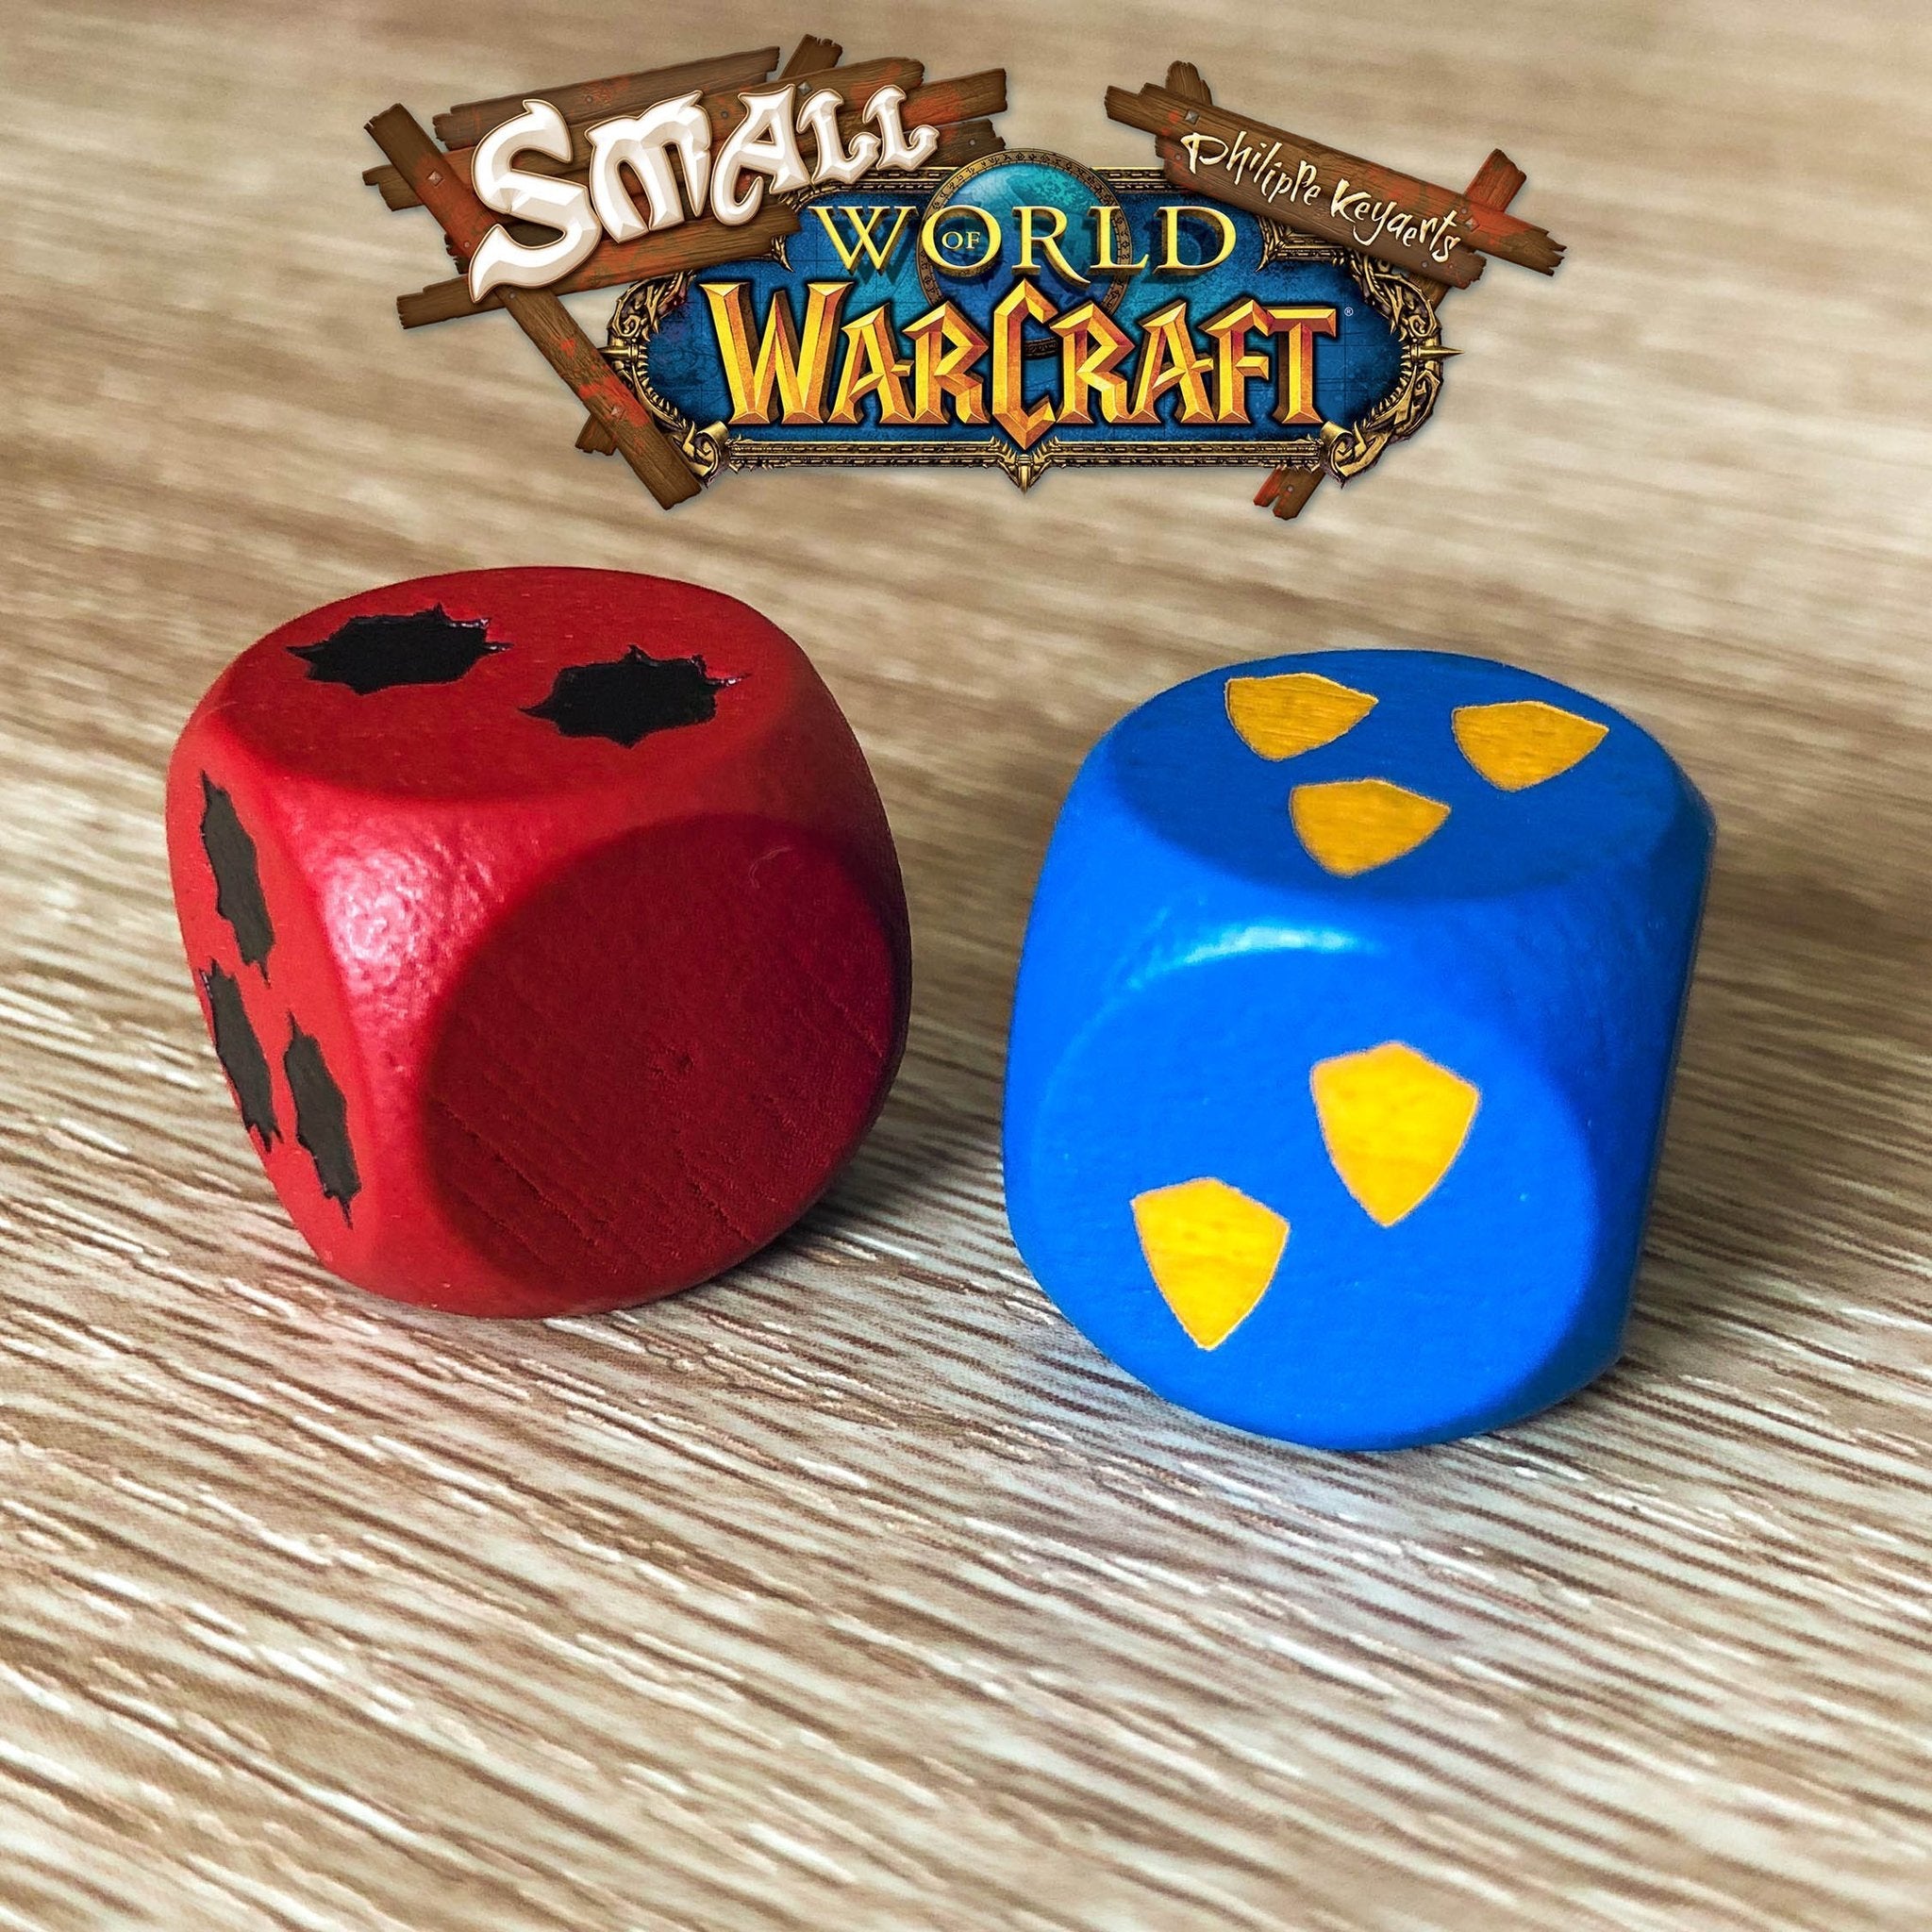 Small World of Warcraft: Faction Dice